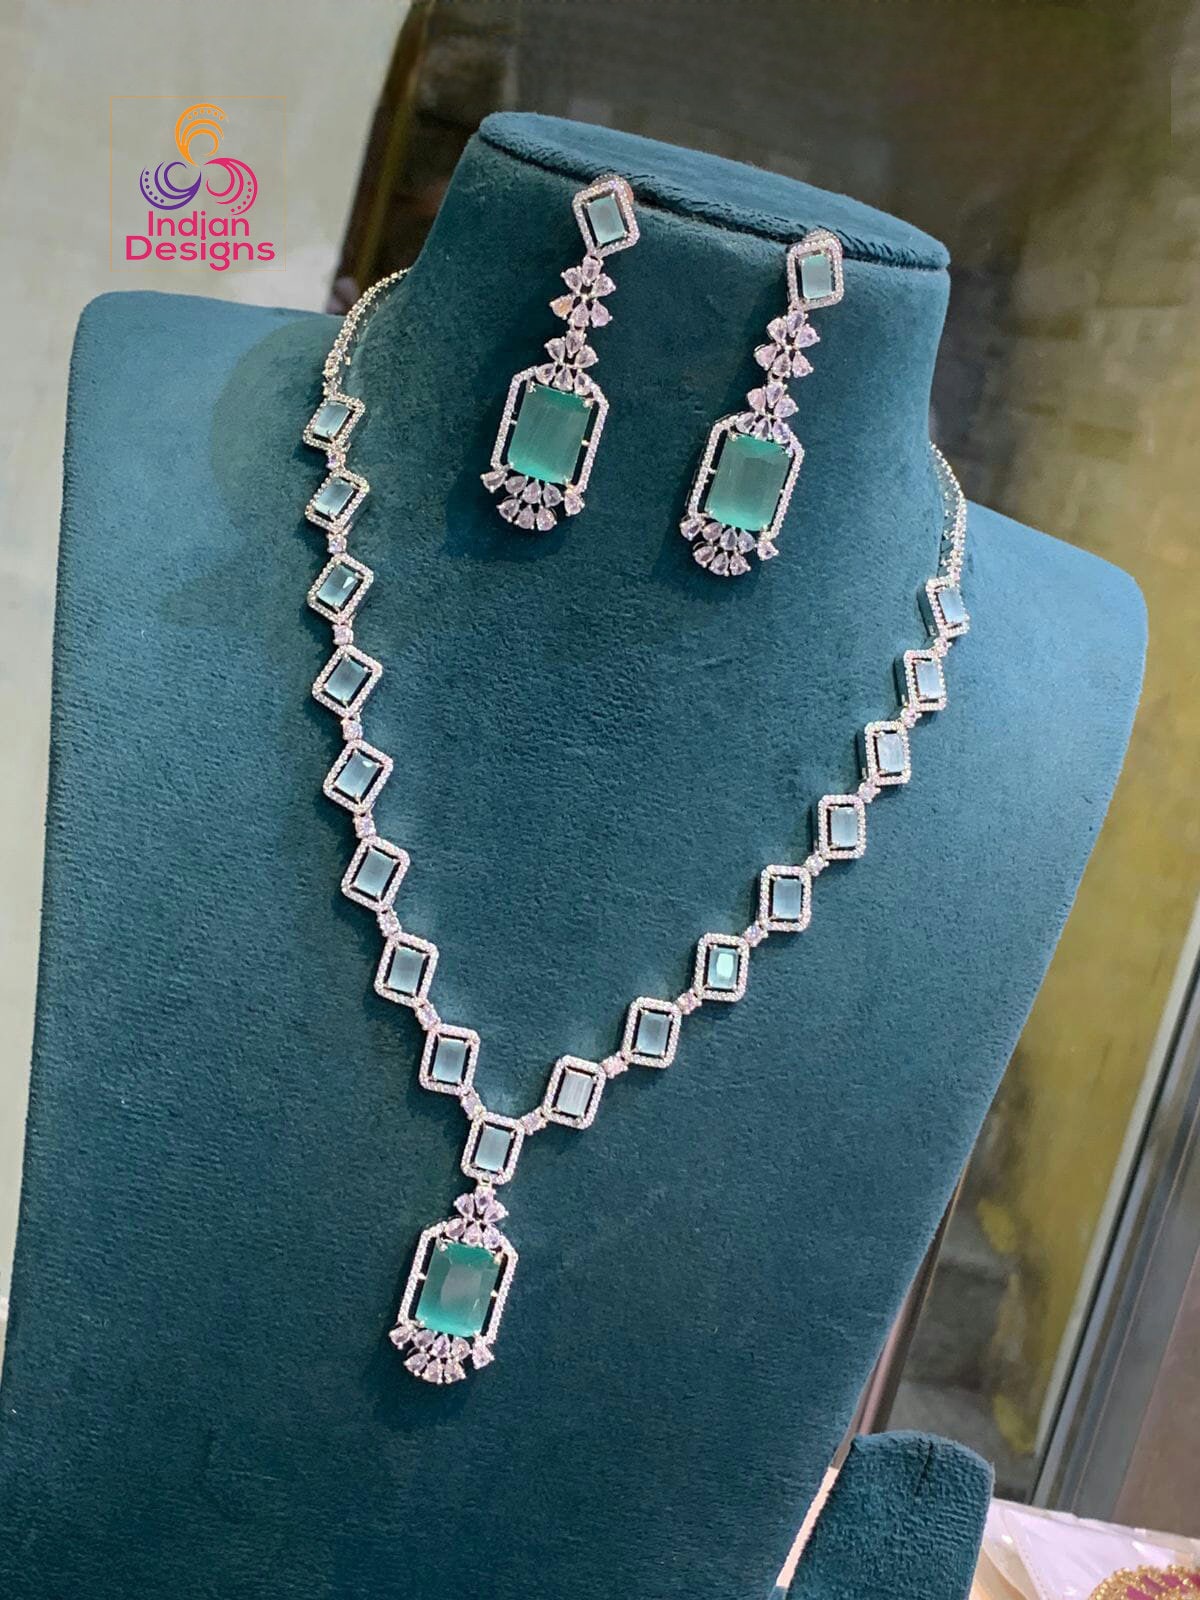 Exclusive Silver-Toned American Diamond Necklace and Earring Set | Indian Wedding Jewelry |Ruby Diamond Silver necklace set | Gift For Her